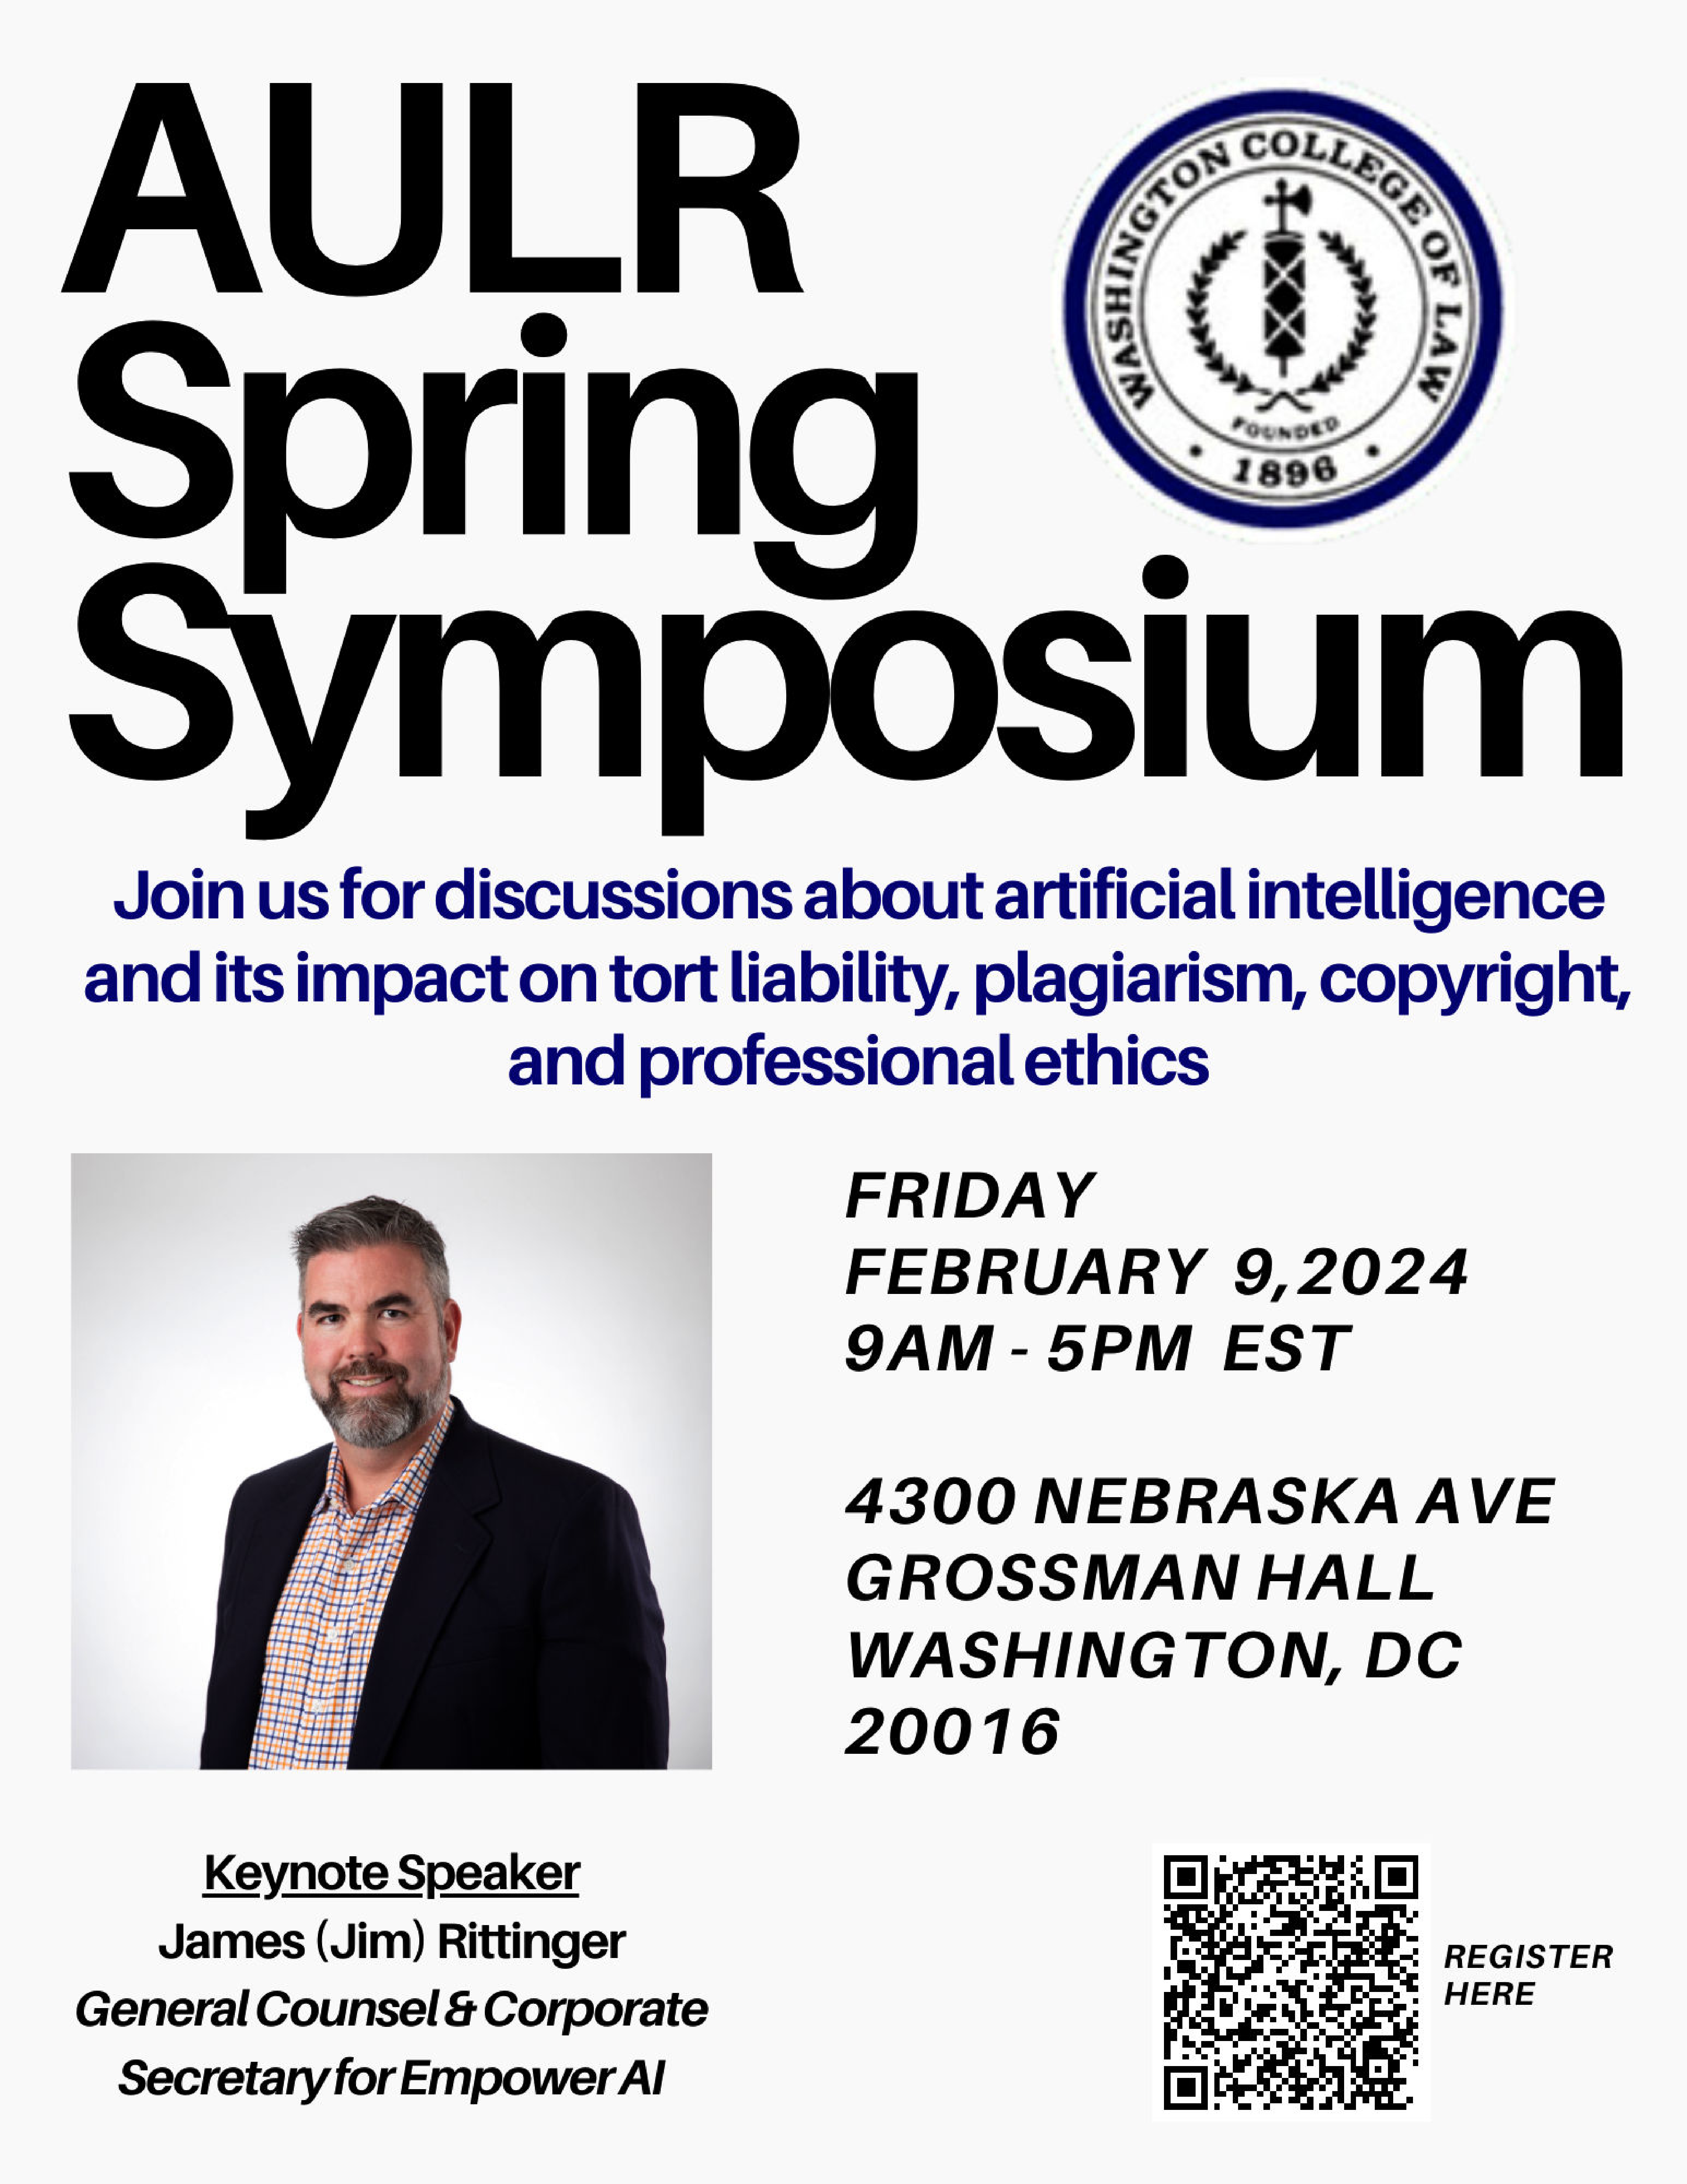 AULR-Spring-Symposium-Flyer.png